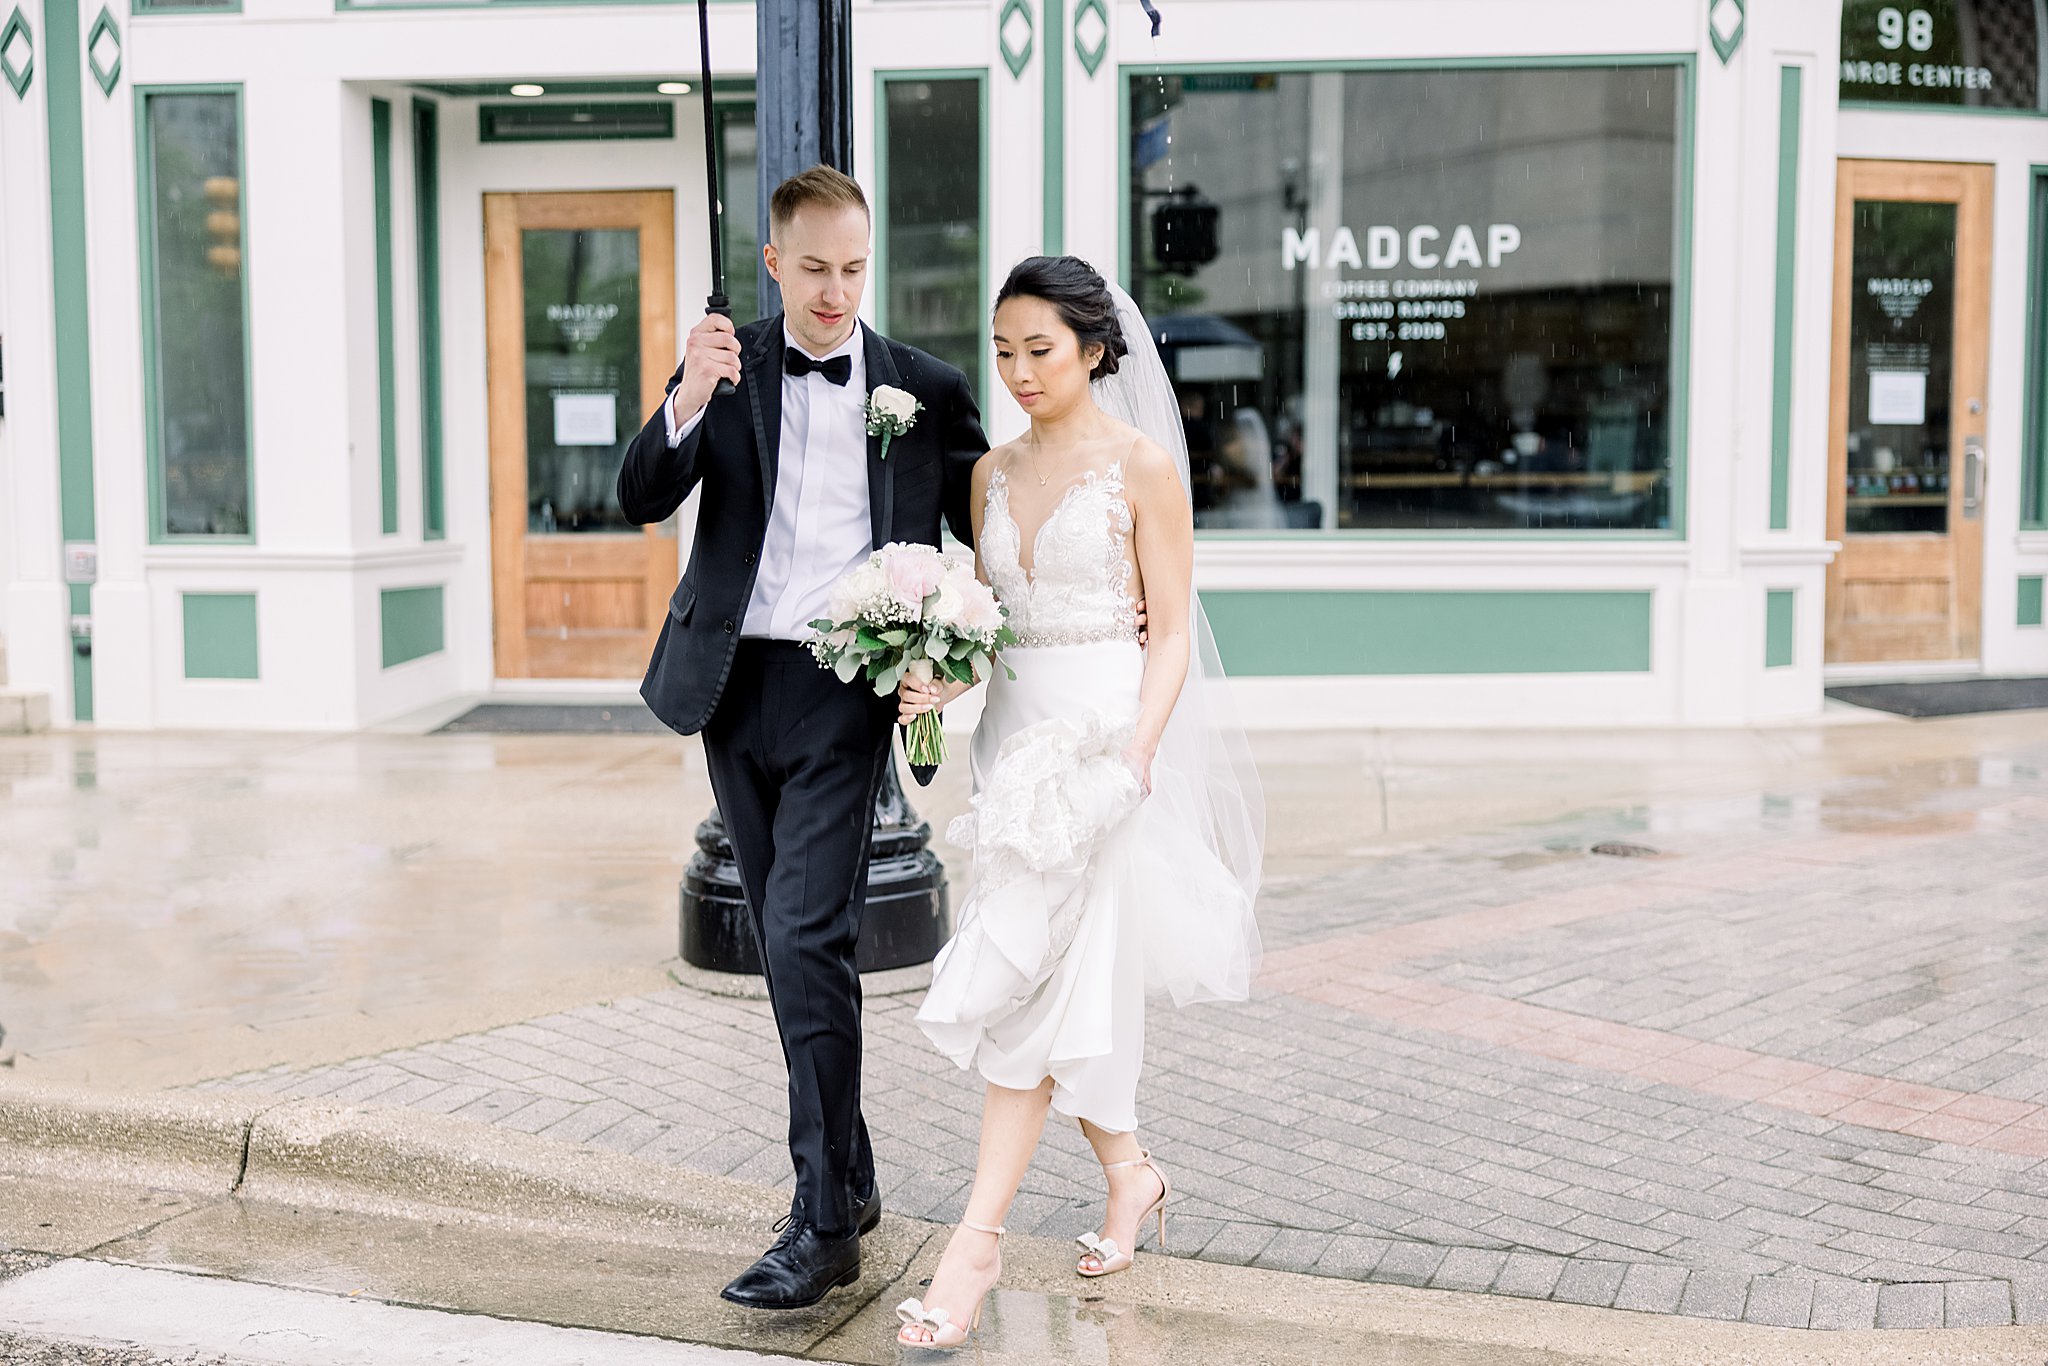 Bride and groom cross street in front of Madcap during elegant Grand Rapids wedding.